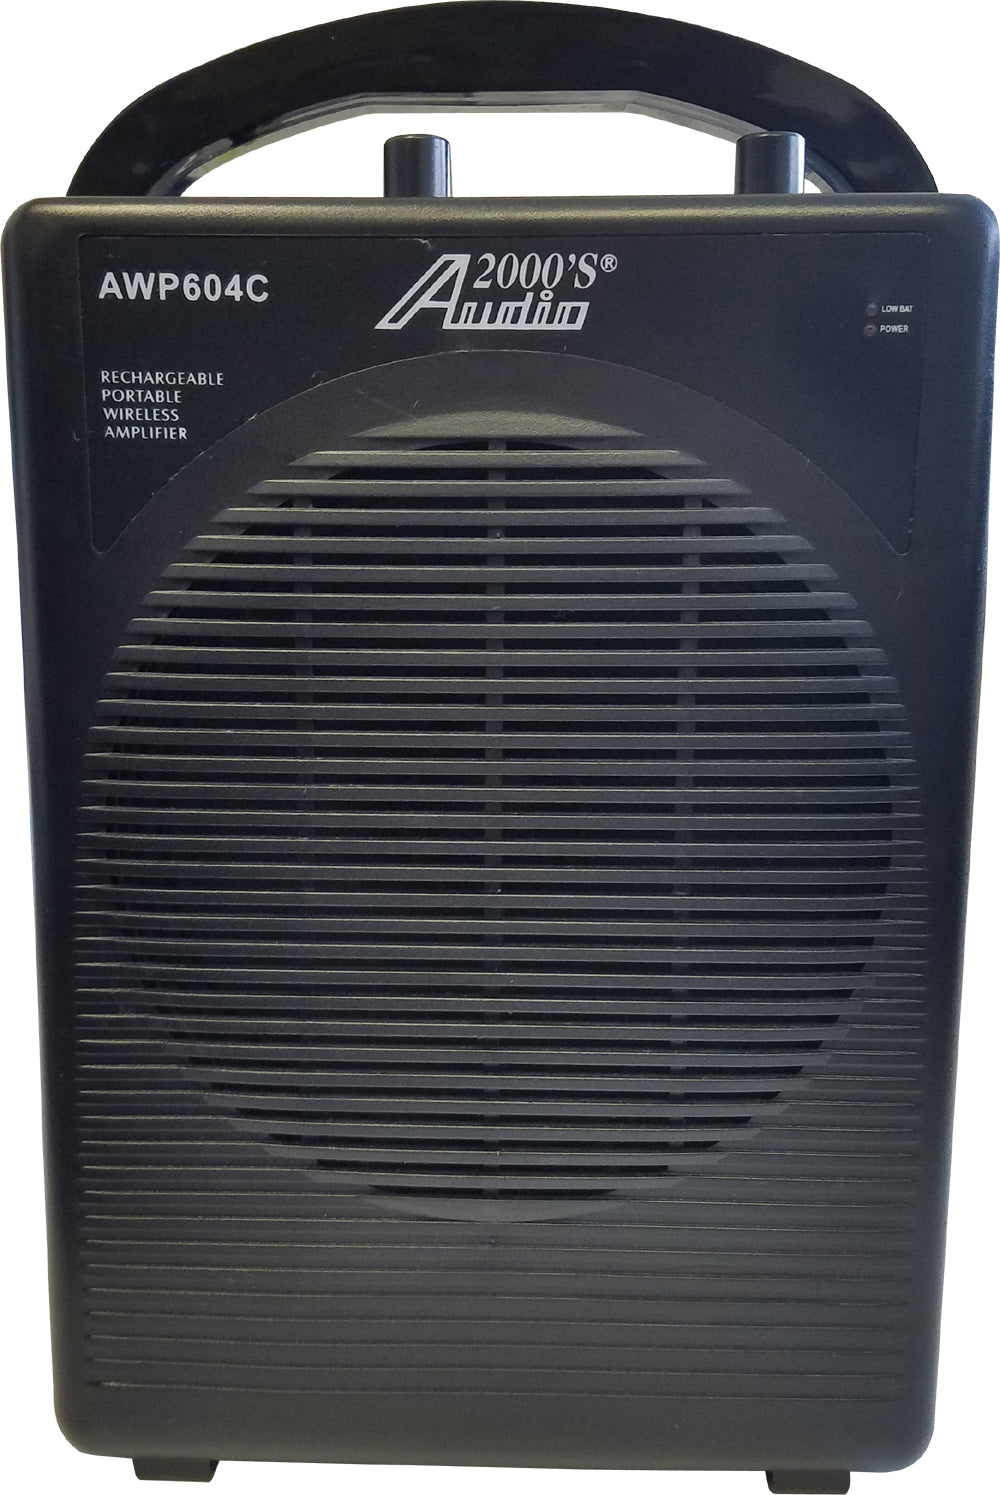 Audio 2000 AWP604C-L Portable 30 Watt PA System with Dual Channel Wireless Microphones (1 Handheld, 1 Body Pack, 1 Lapel & 1 Headset) and Carrying Bag